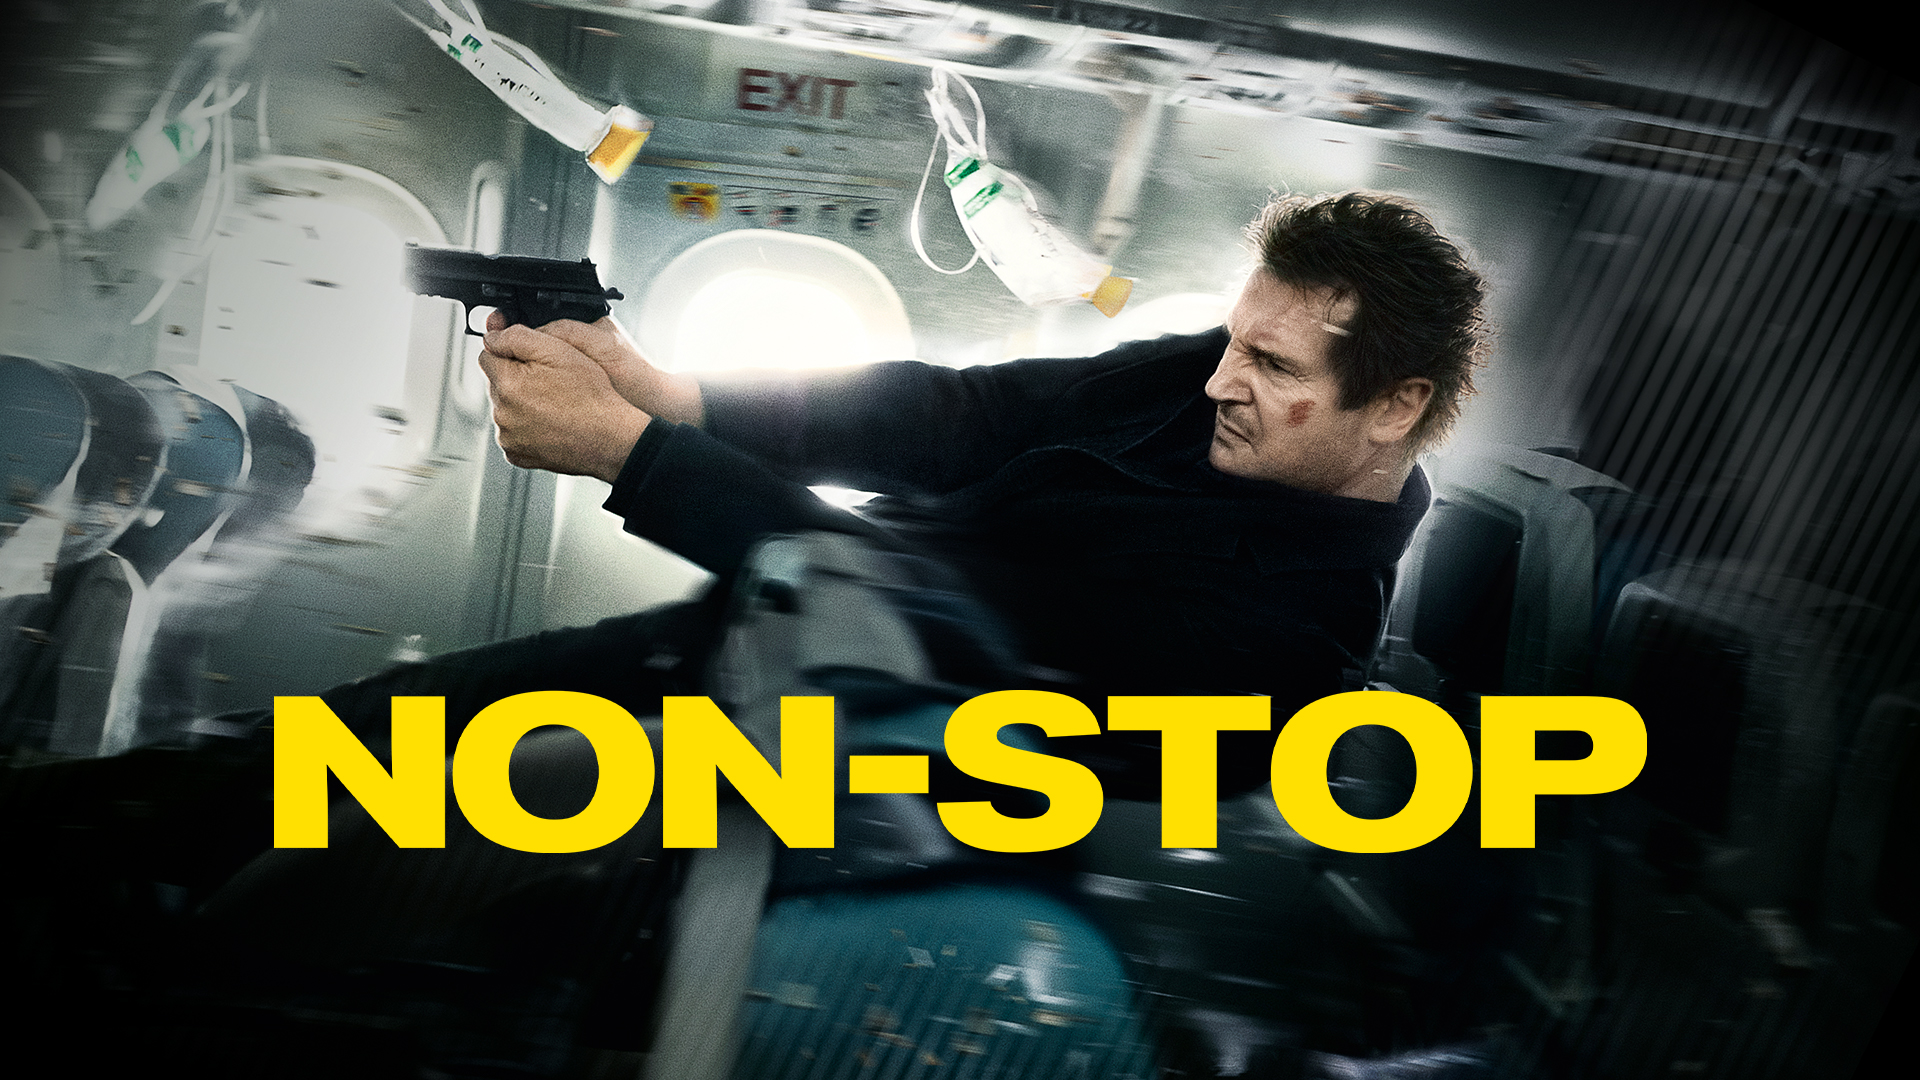 david kempton recommends non stop movie online free pic